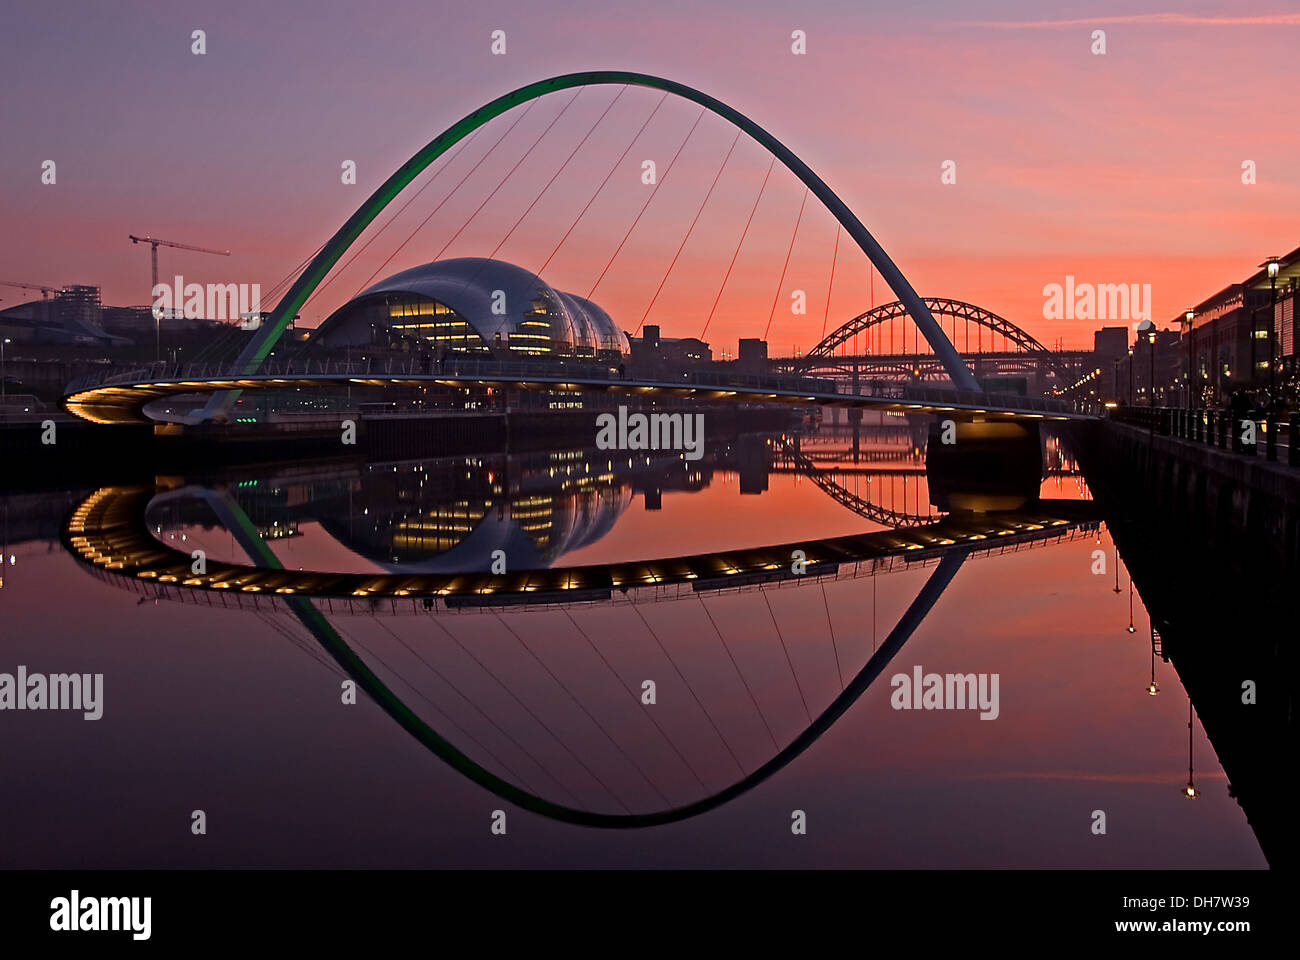 River Tyne in central Newcastle upon Tyne at sunset. The bridges of the River Tyne are iconic landmarks of North East England. Stock Photo